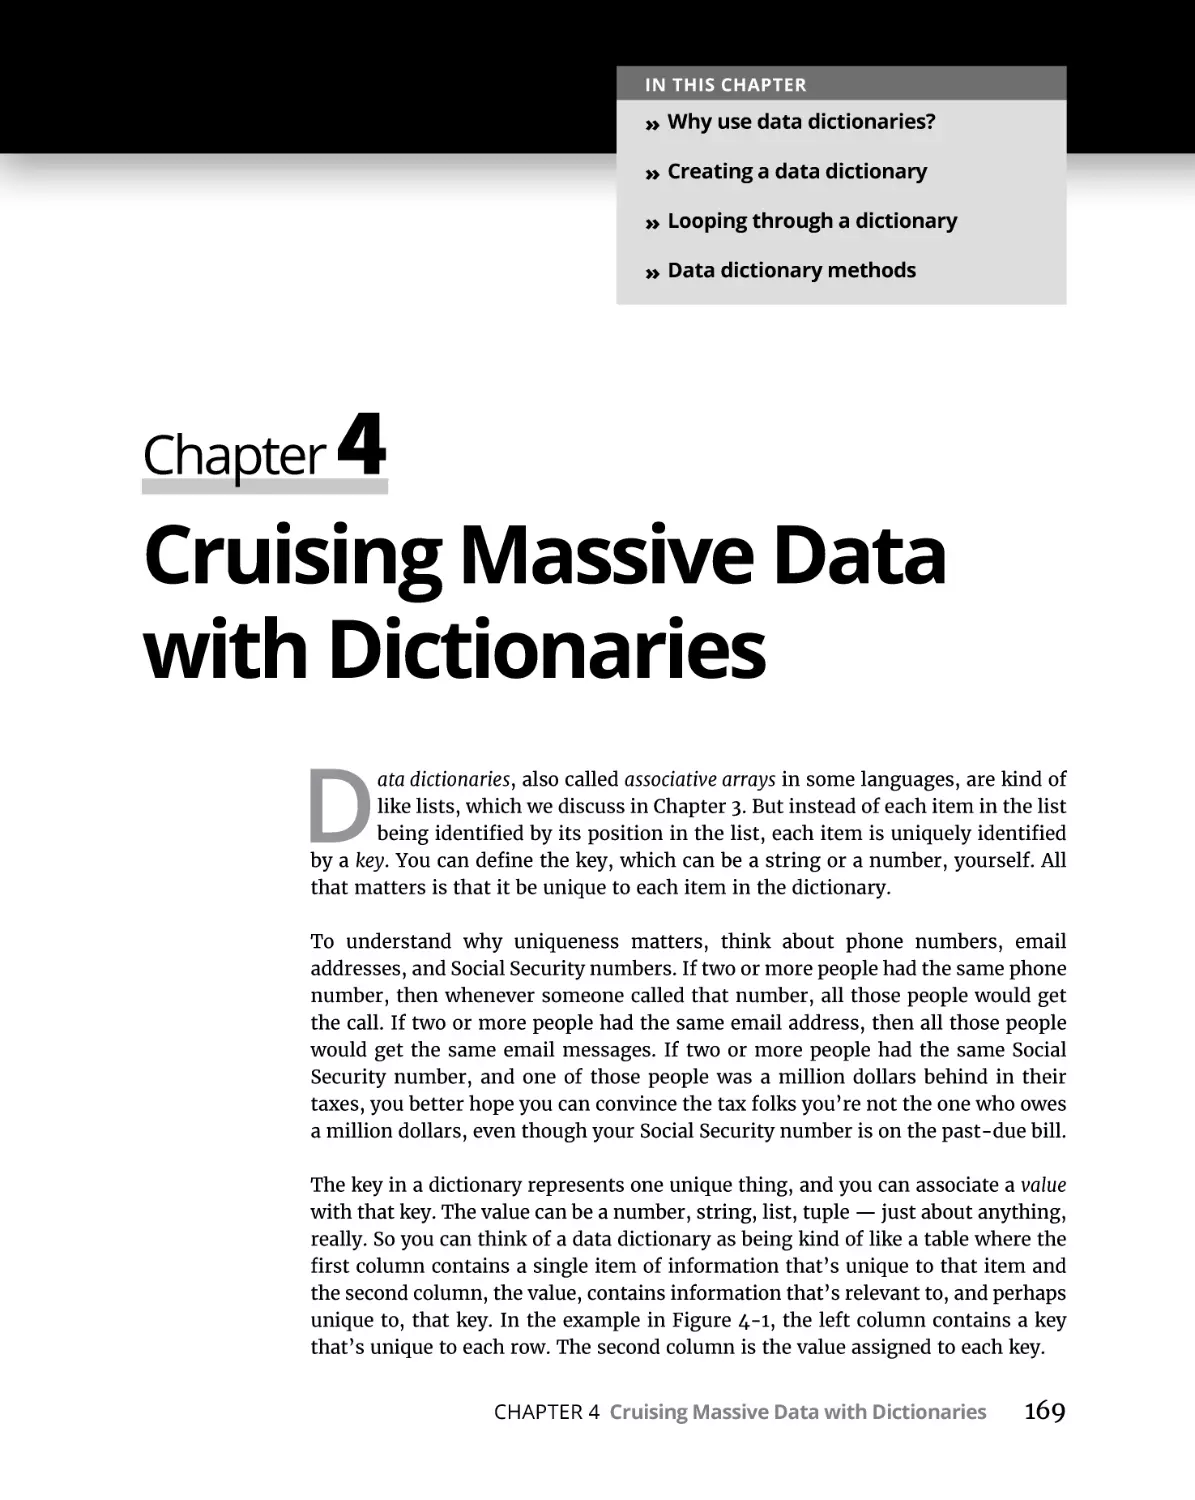 Chapter 4 Cruising Massive Data with Dictionaries